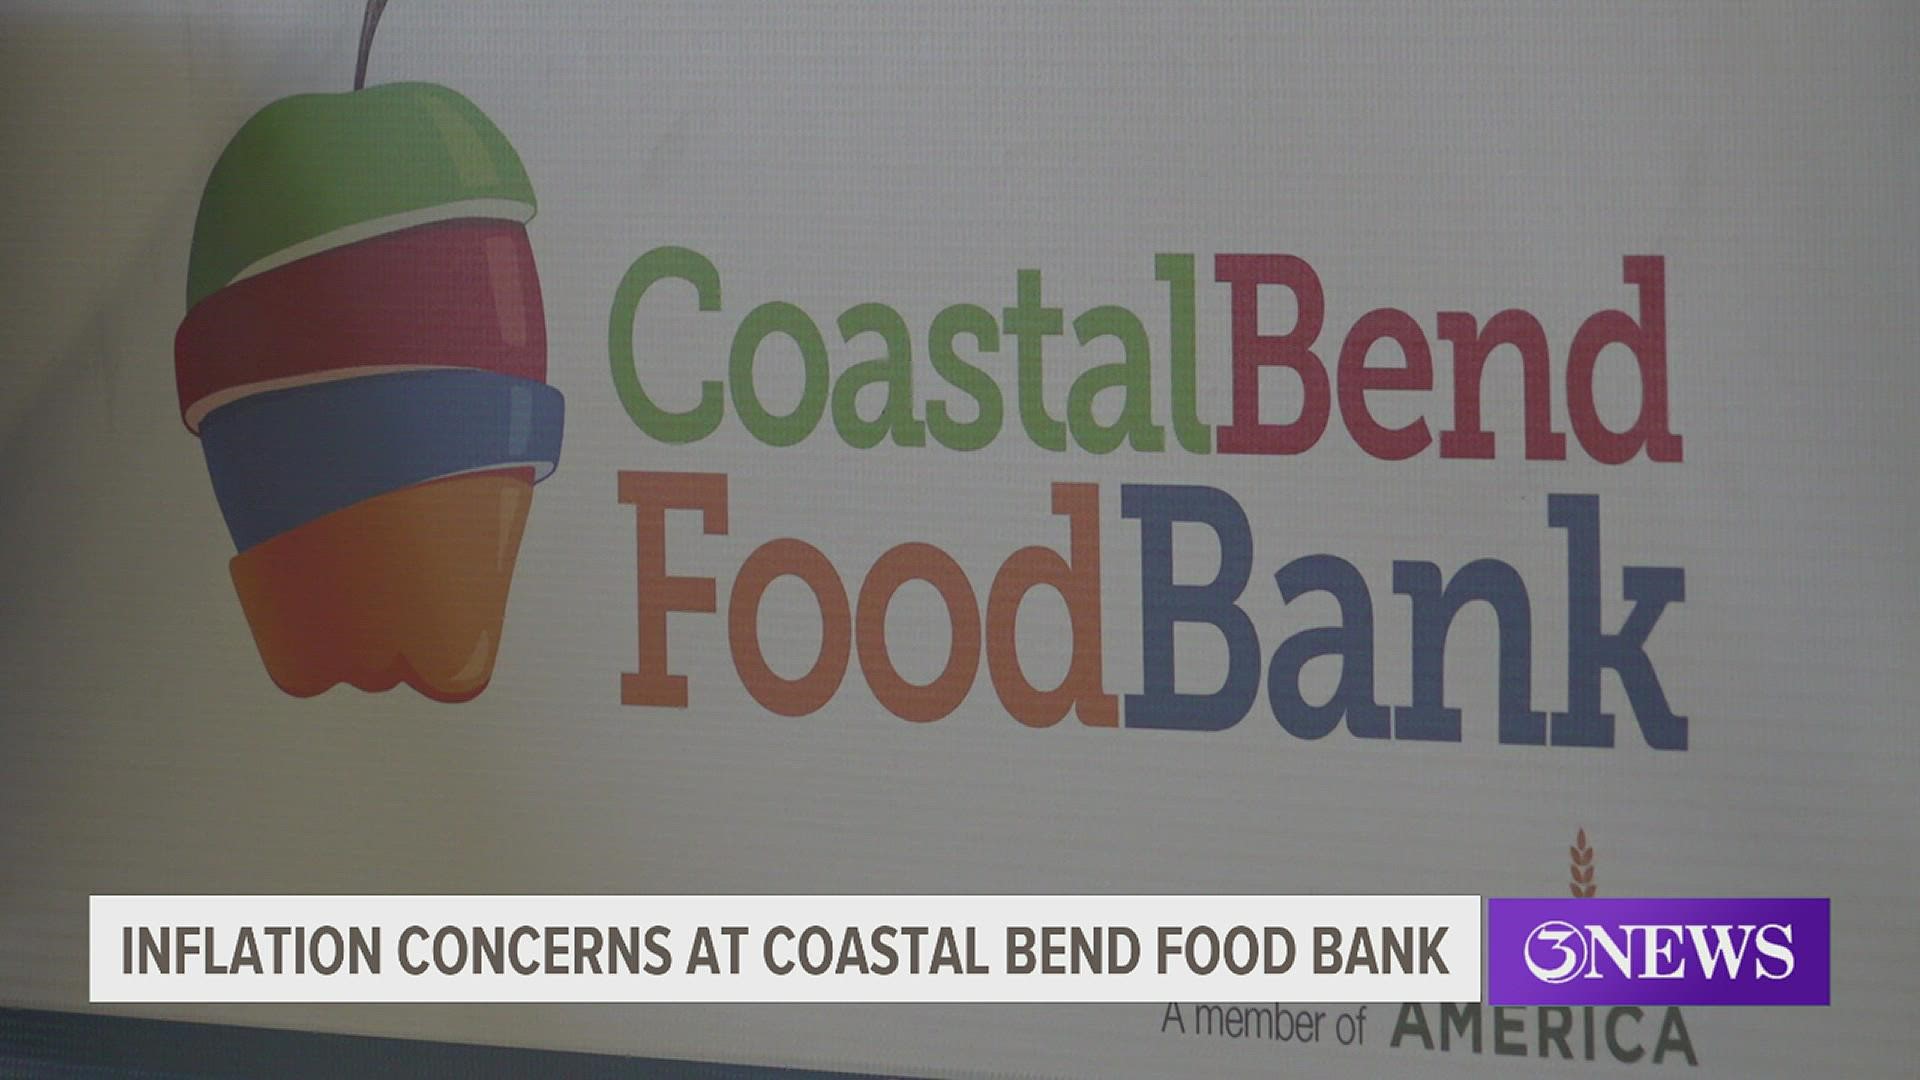 Bean Hanson, Executive Director of the food bank, said they're relying on more donations from the community as their food sources give them less.